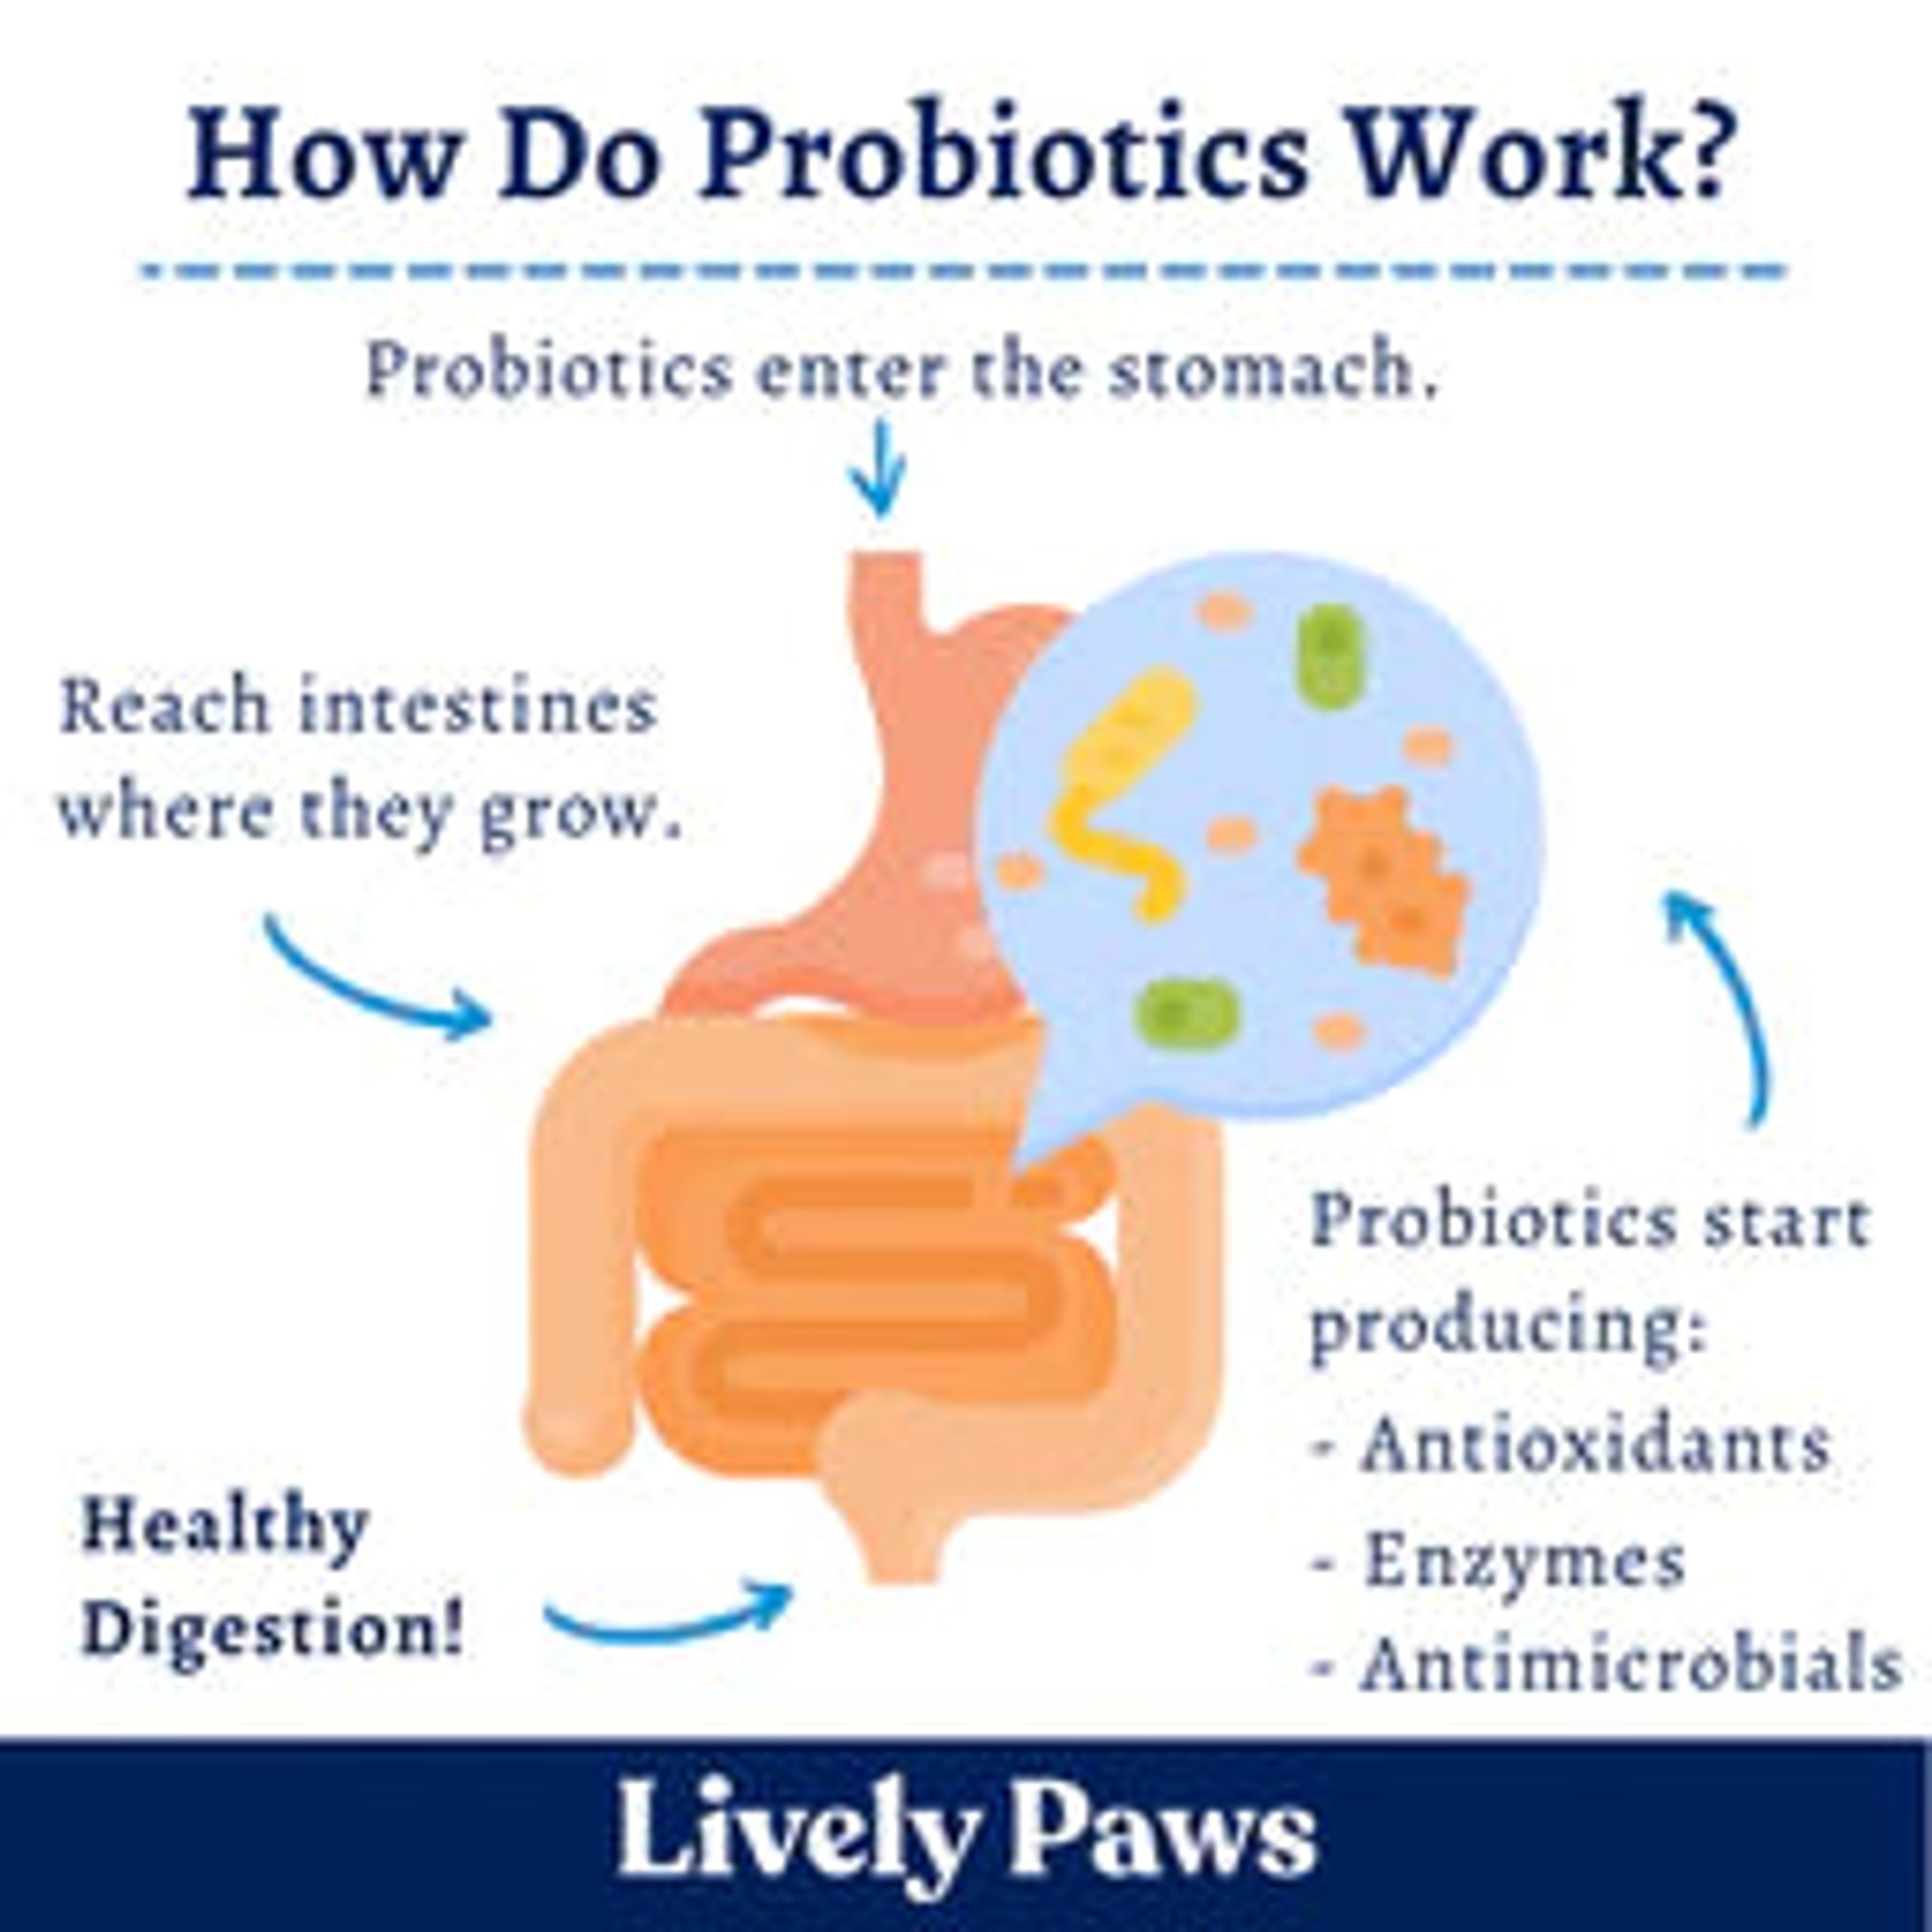 Lively Paws Probiotic Soft Chew for Dogs with Soil based Prebiotic to Restore Gut Health